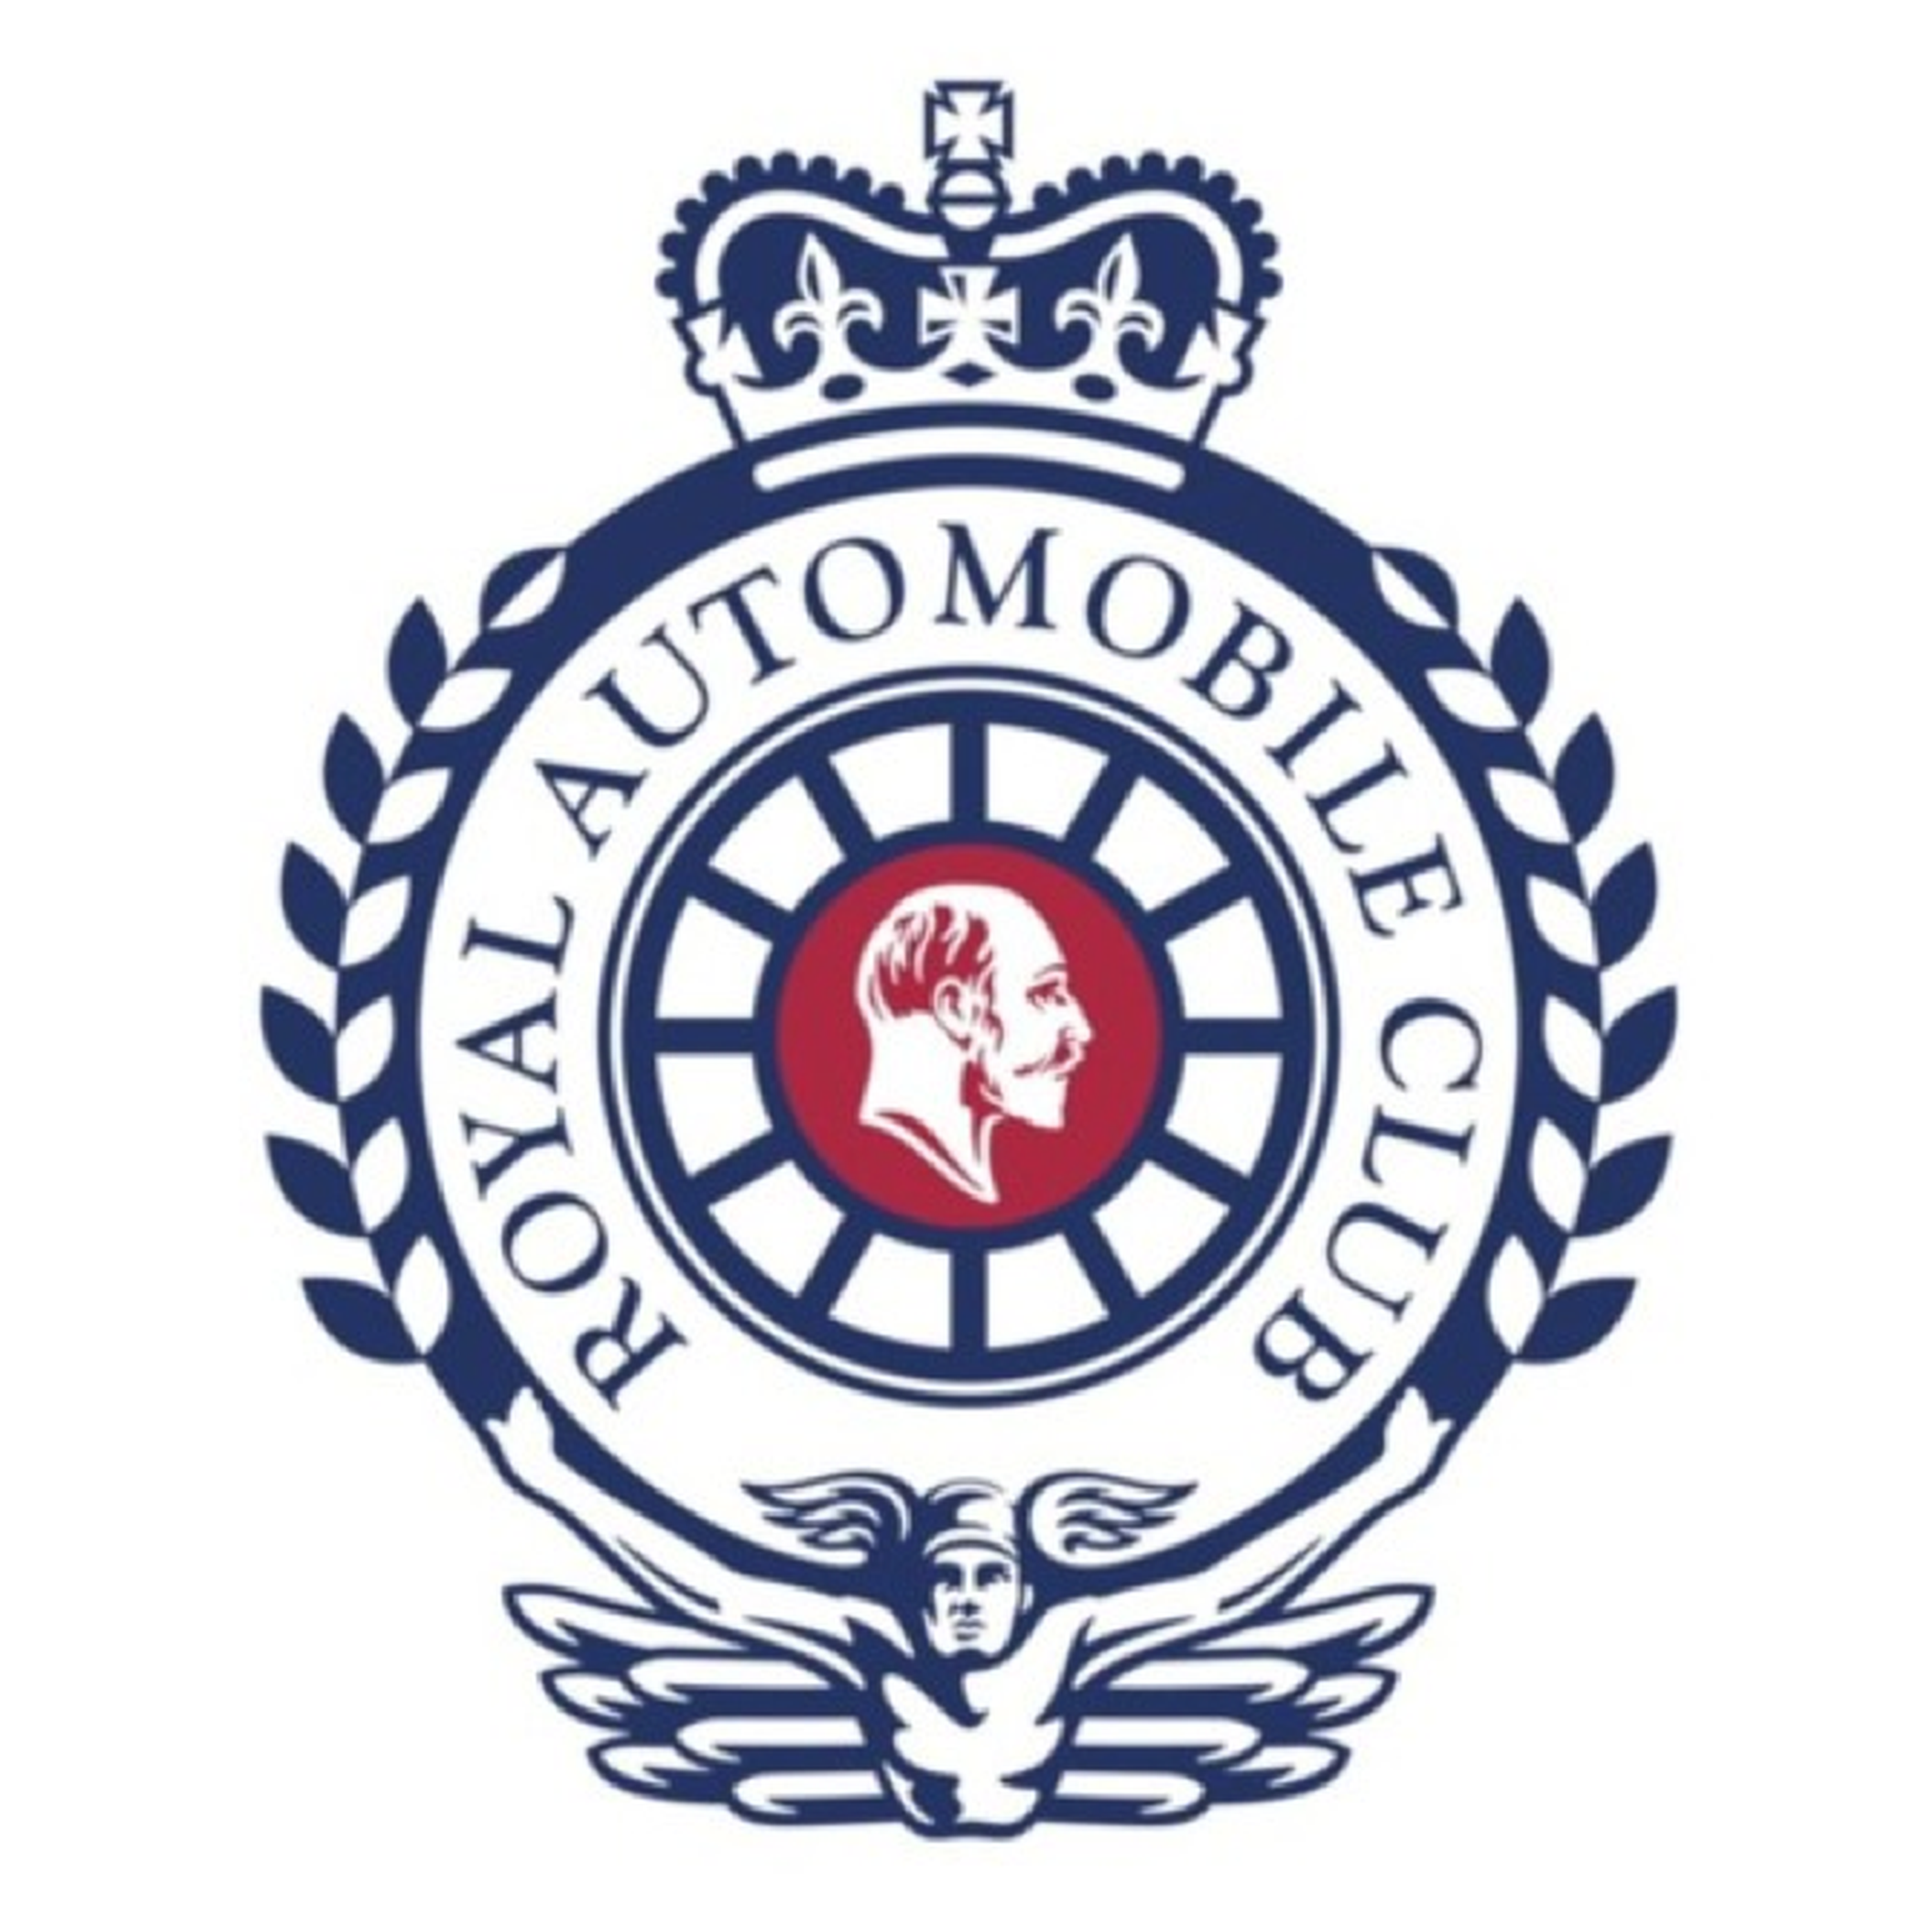 Pat Symonds: Royal Automobile Club Talk Show in association with Motor Sport